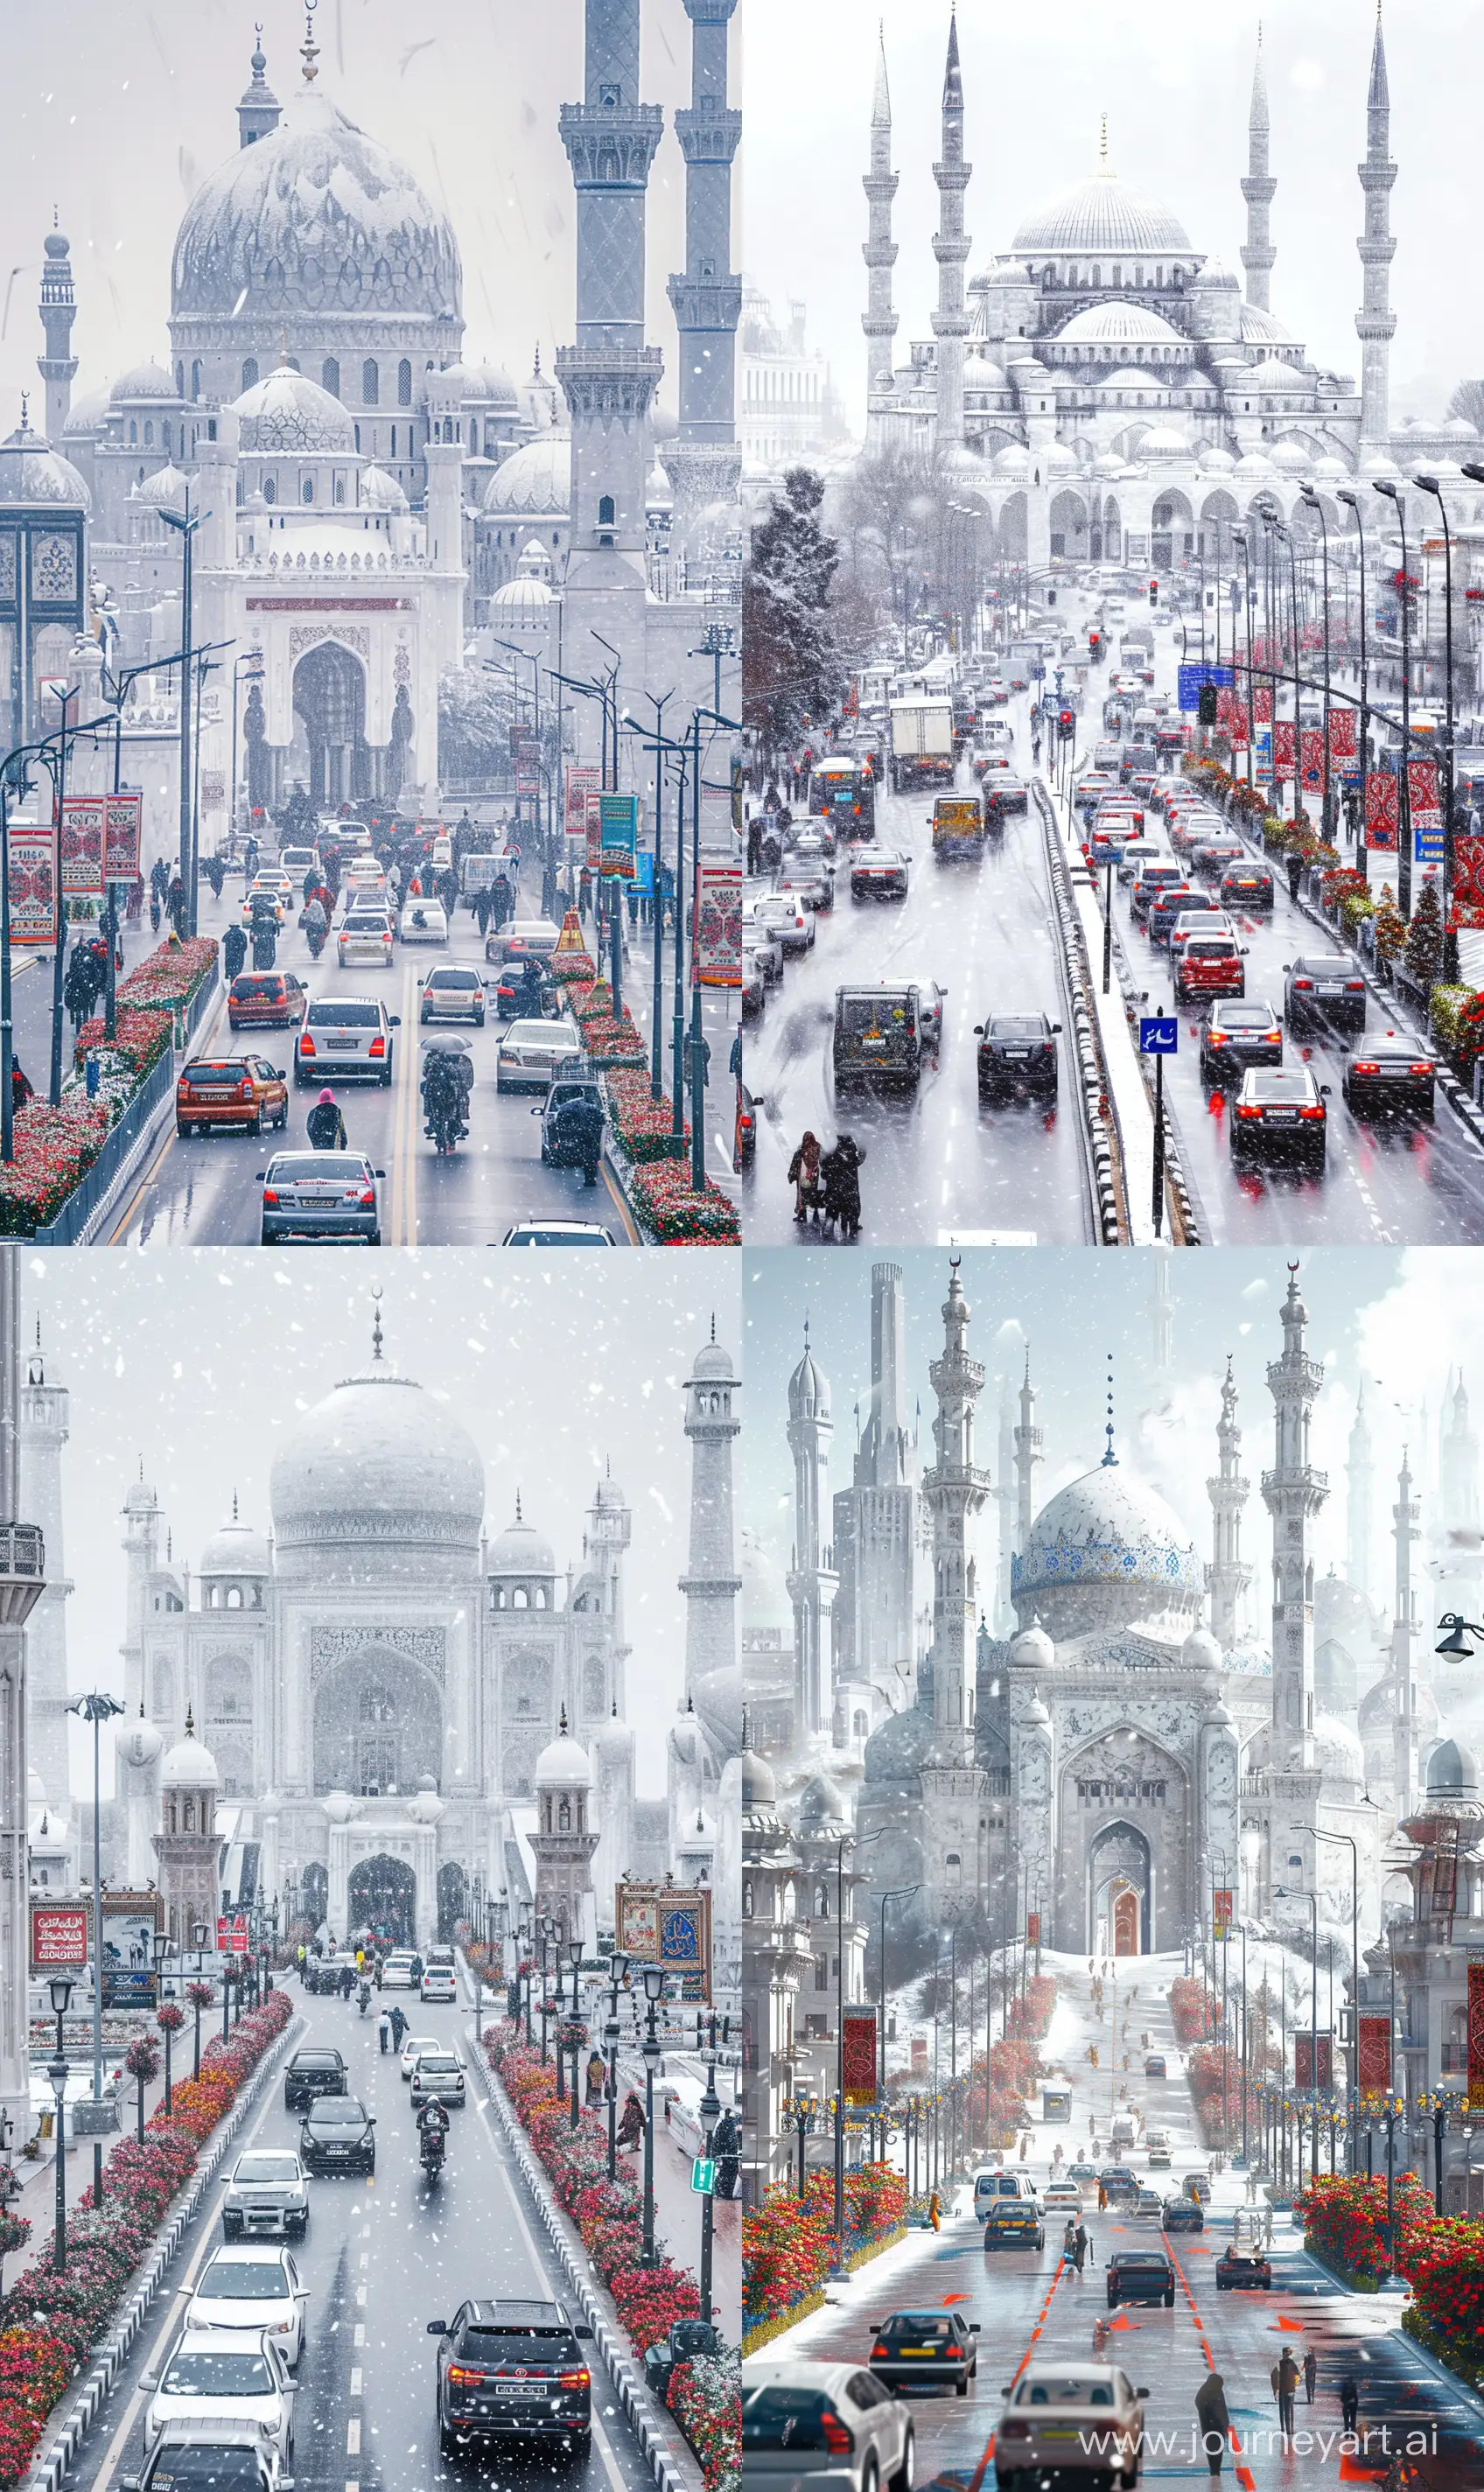 Enchanting-Medieval-Islamic-Cityscape-with-Snowfall-and-Vibrant-Street-Life